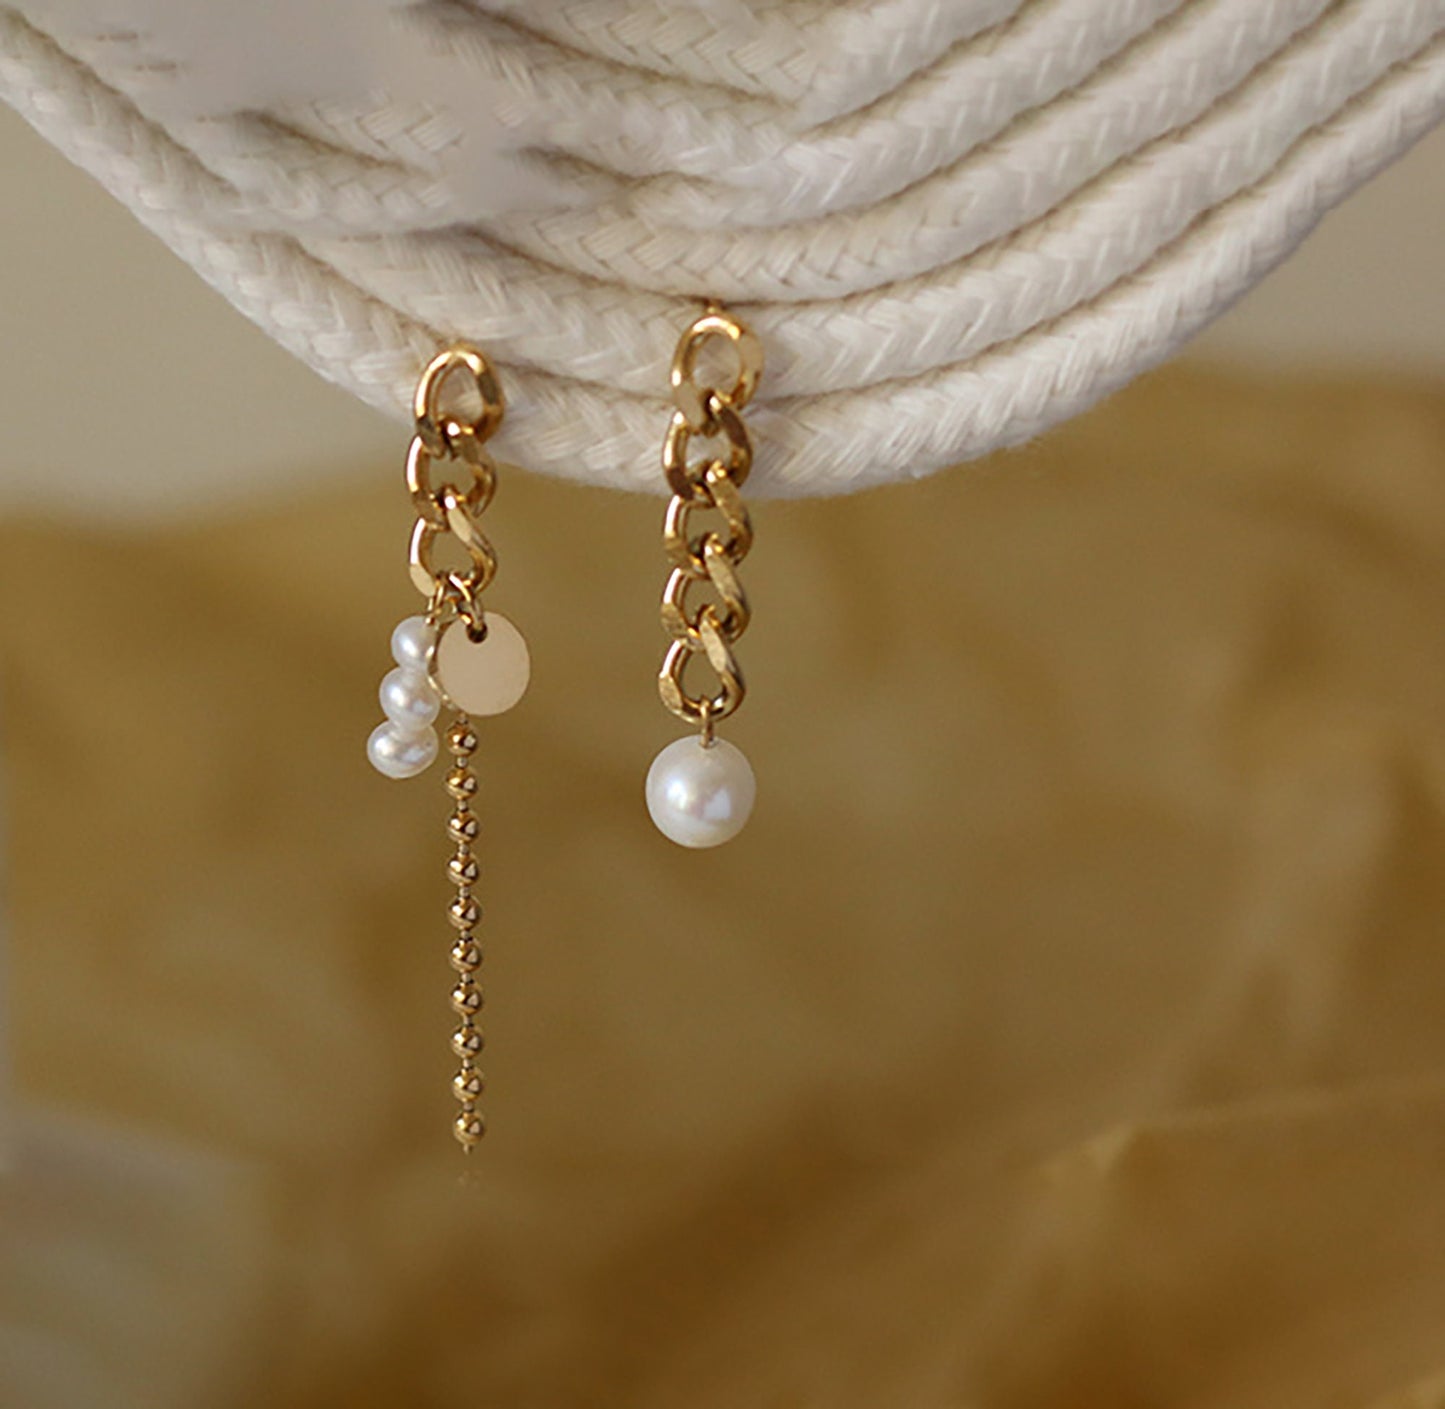 Titanium Real Pearl Mismatch Chain Dangle Earrings, Gold Plated, Hypoallergenic, Implant Grade Titanium Waterproof, Vintage Style, Minimal